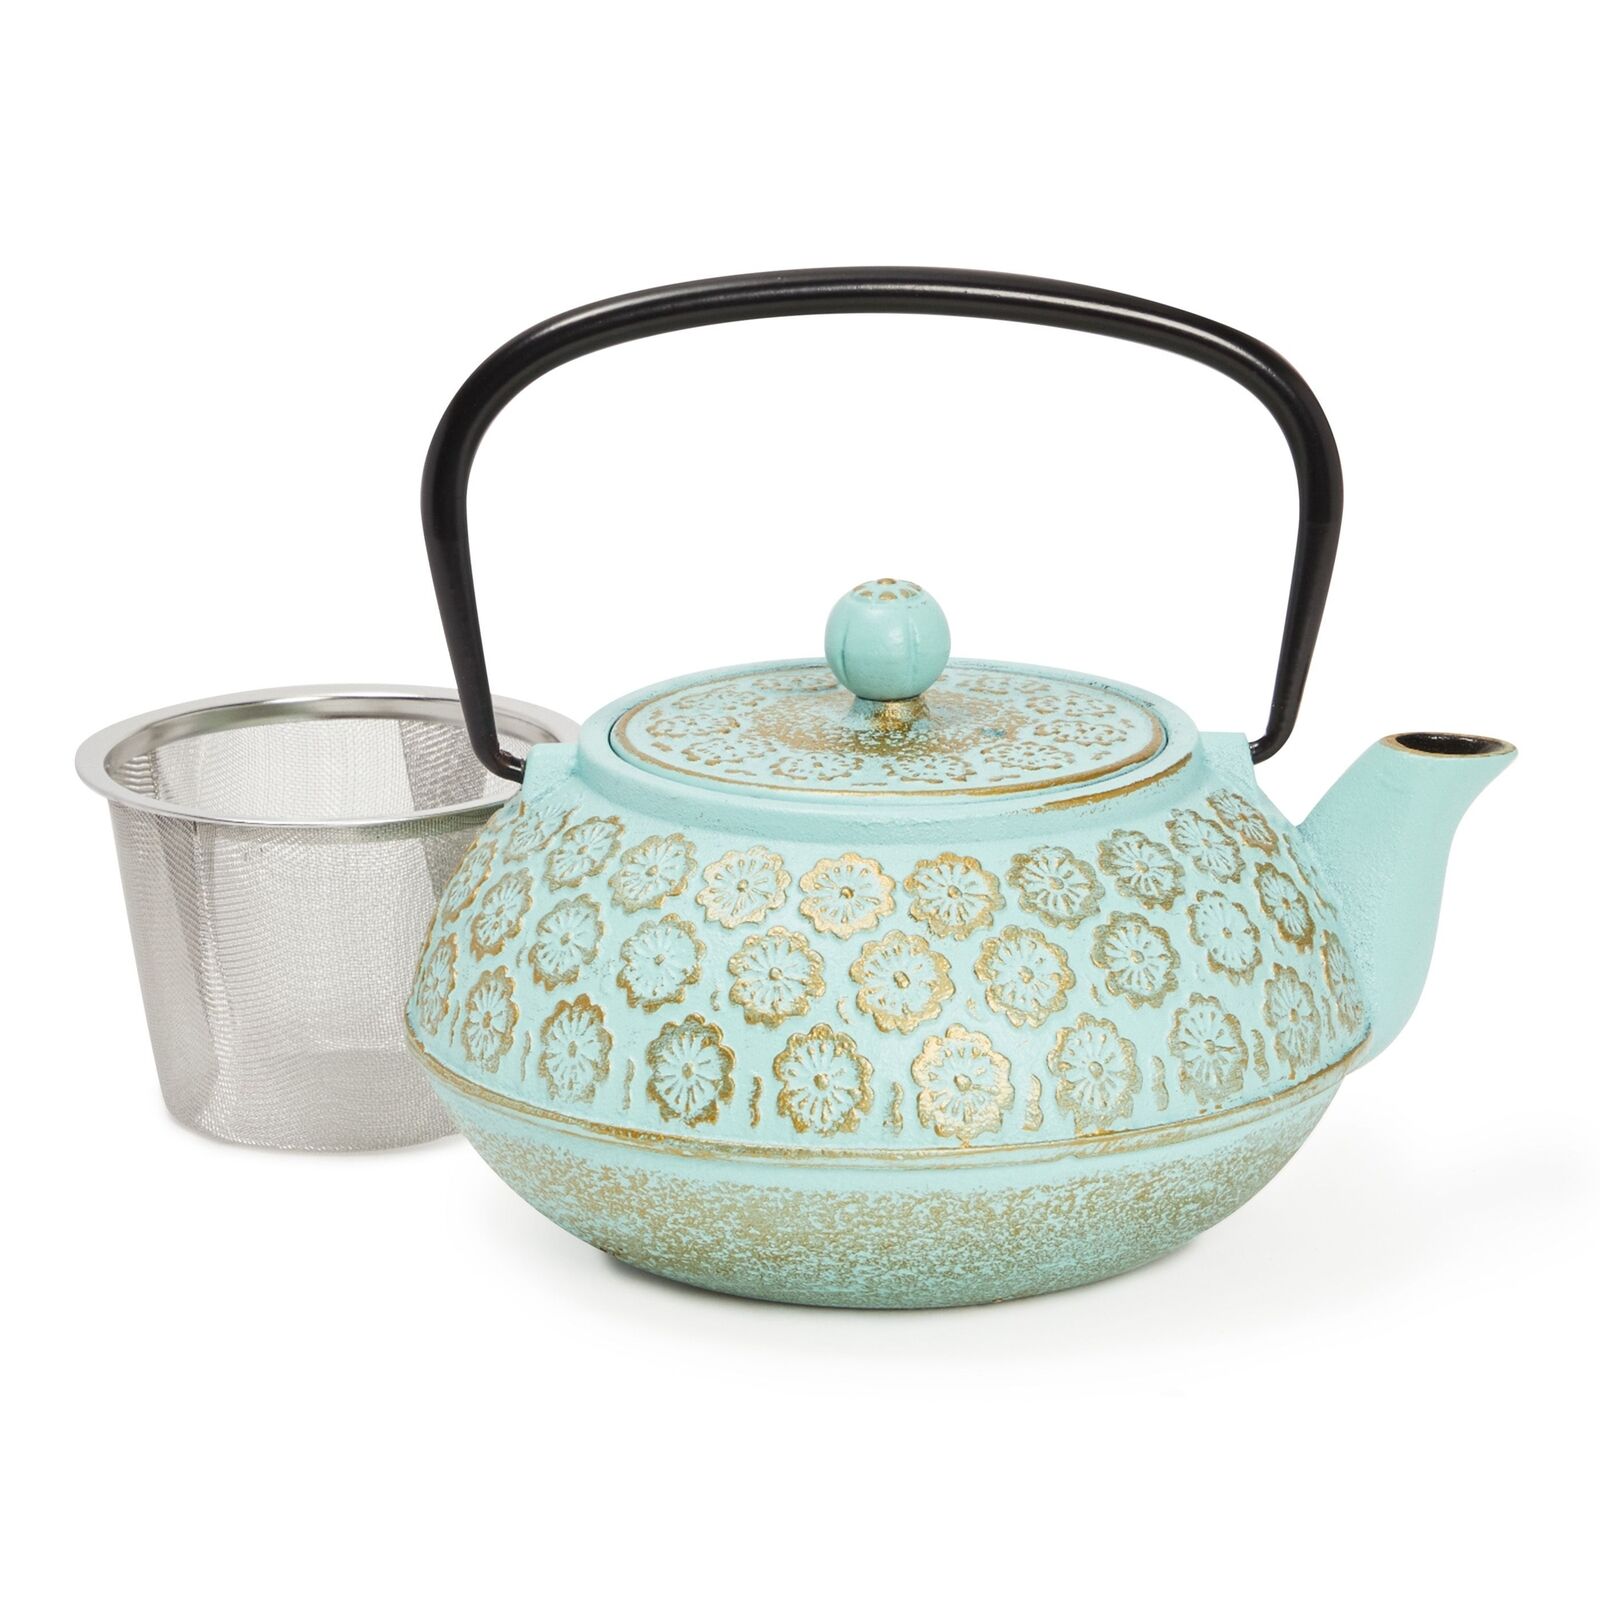 34oz Classic Cast Iron Tea Pot Kettle with Stainless Steel Infuser, Teal Floral